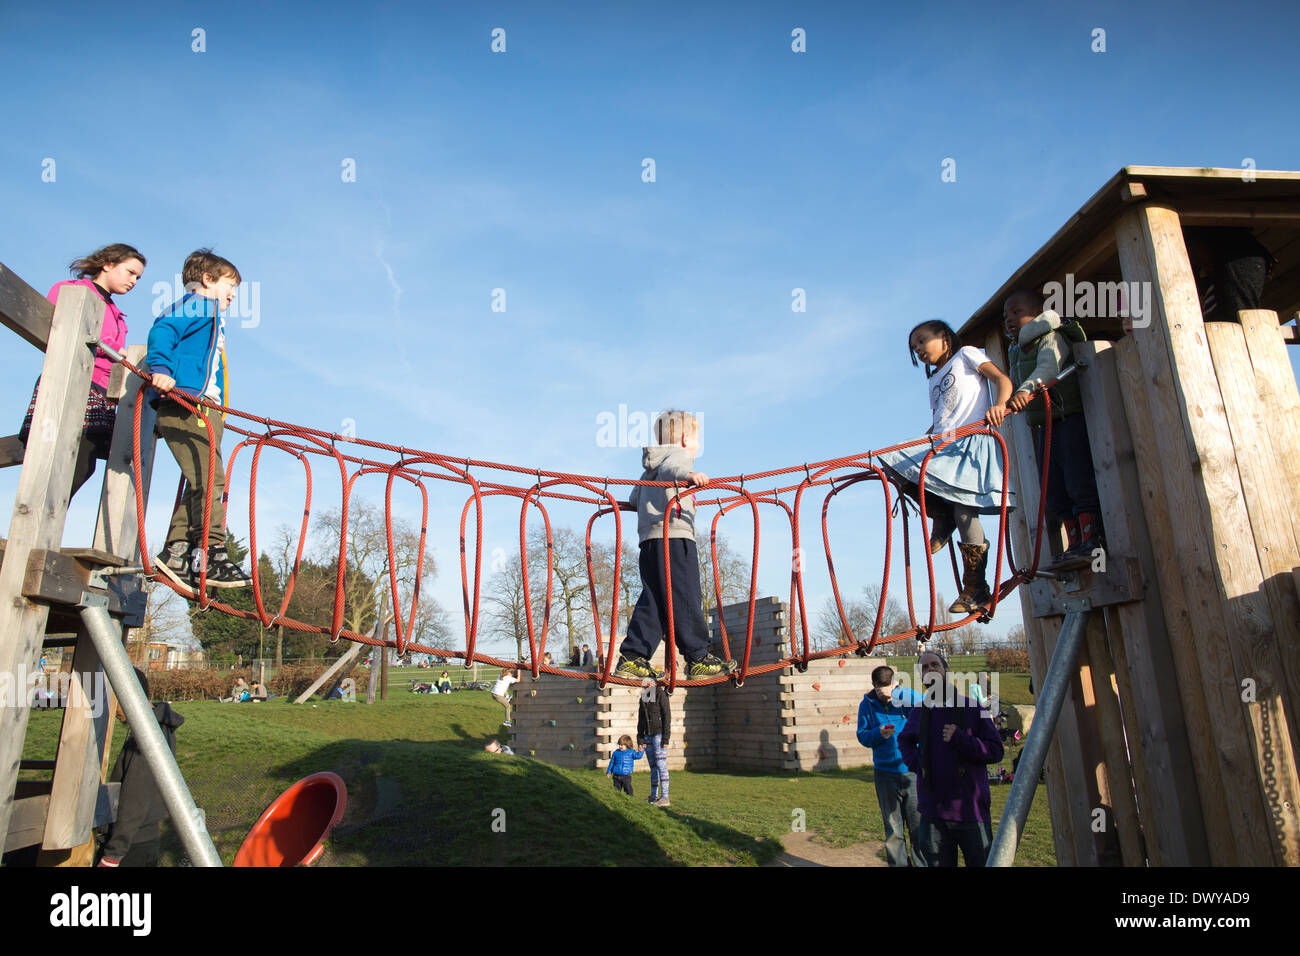 Children's play area at Brockwell Park, Lambeth, South London, after being restored by Parks for People programme, England, UK Stock Photo